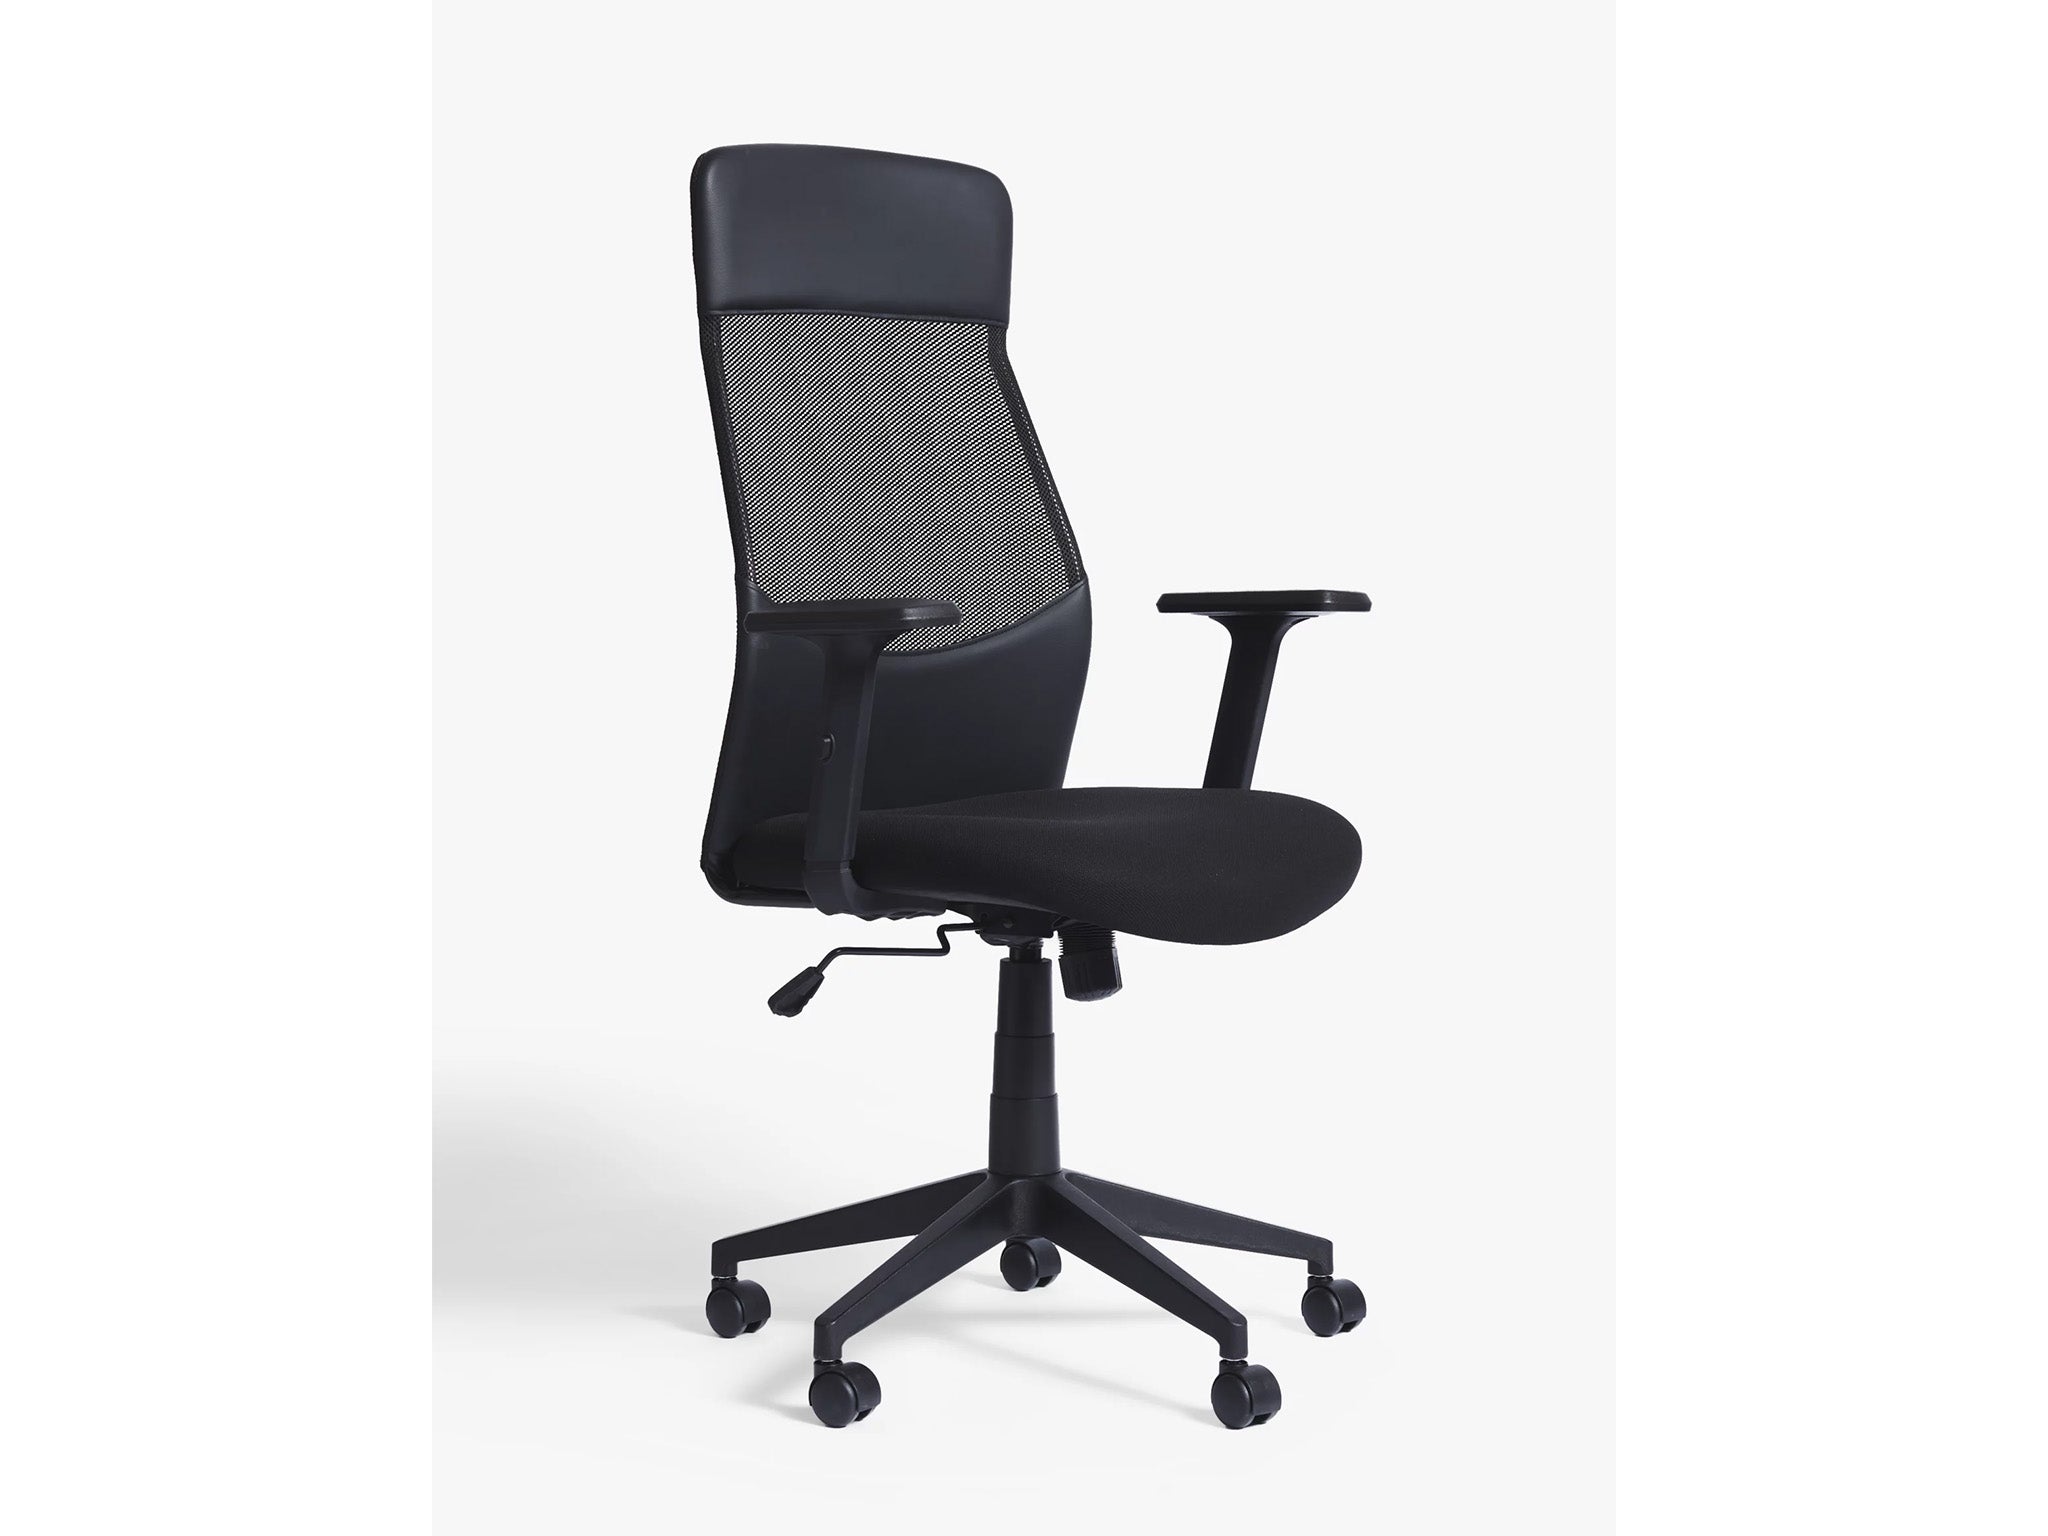 Best ergonomic office chairs John Lewis Anyday inset office chair